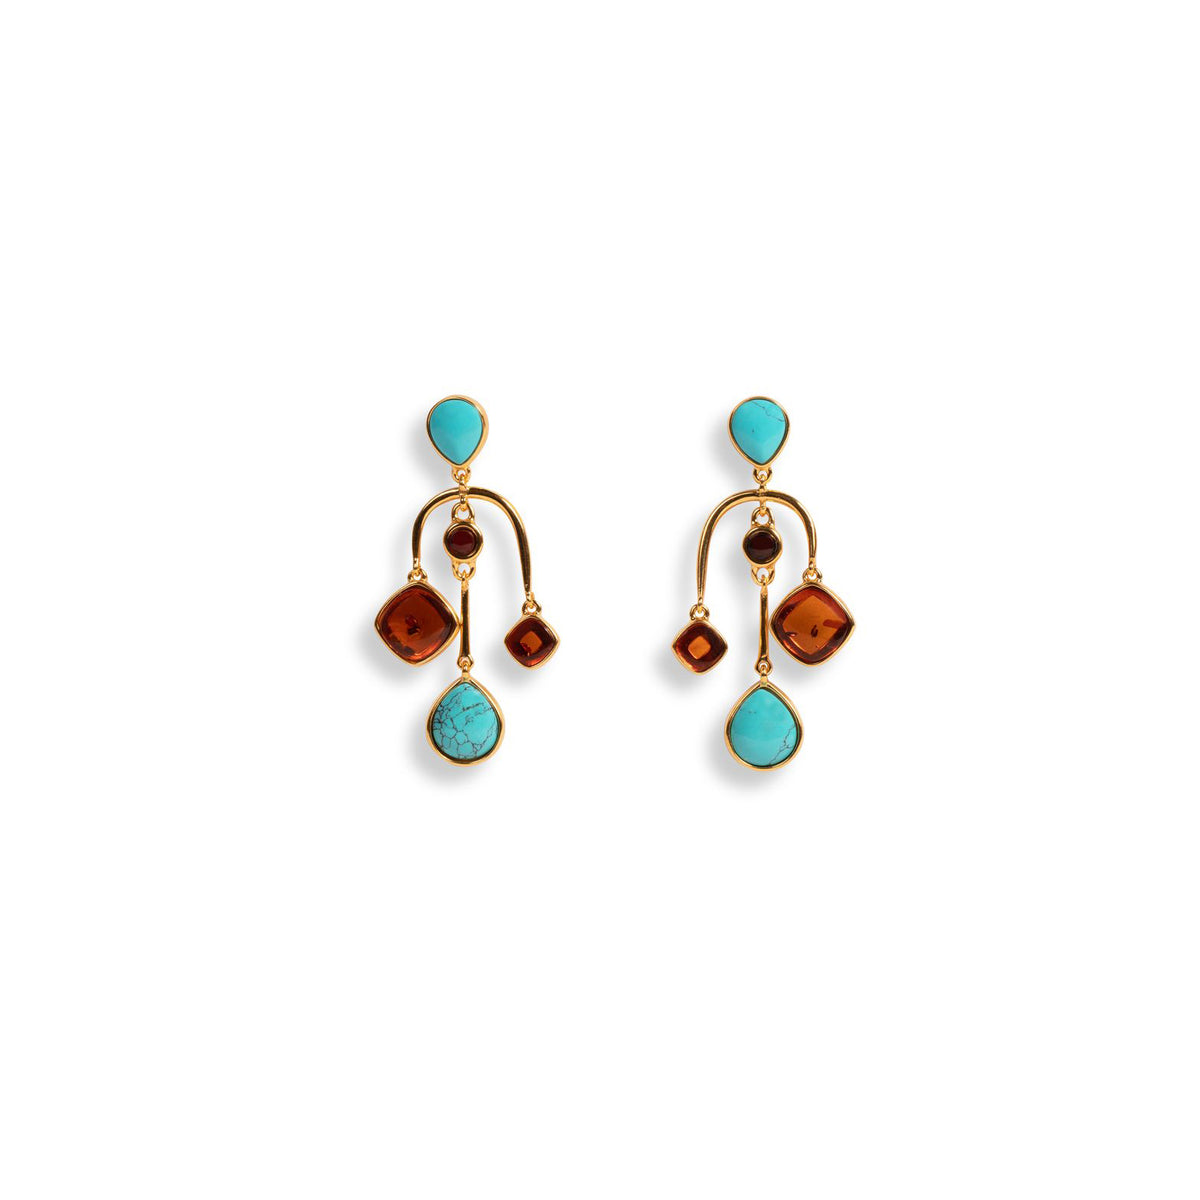 Asymmetrical Amber and Turquoise Earrings